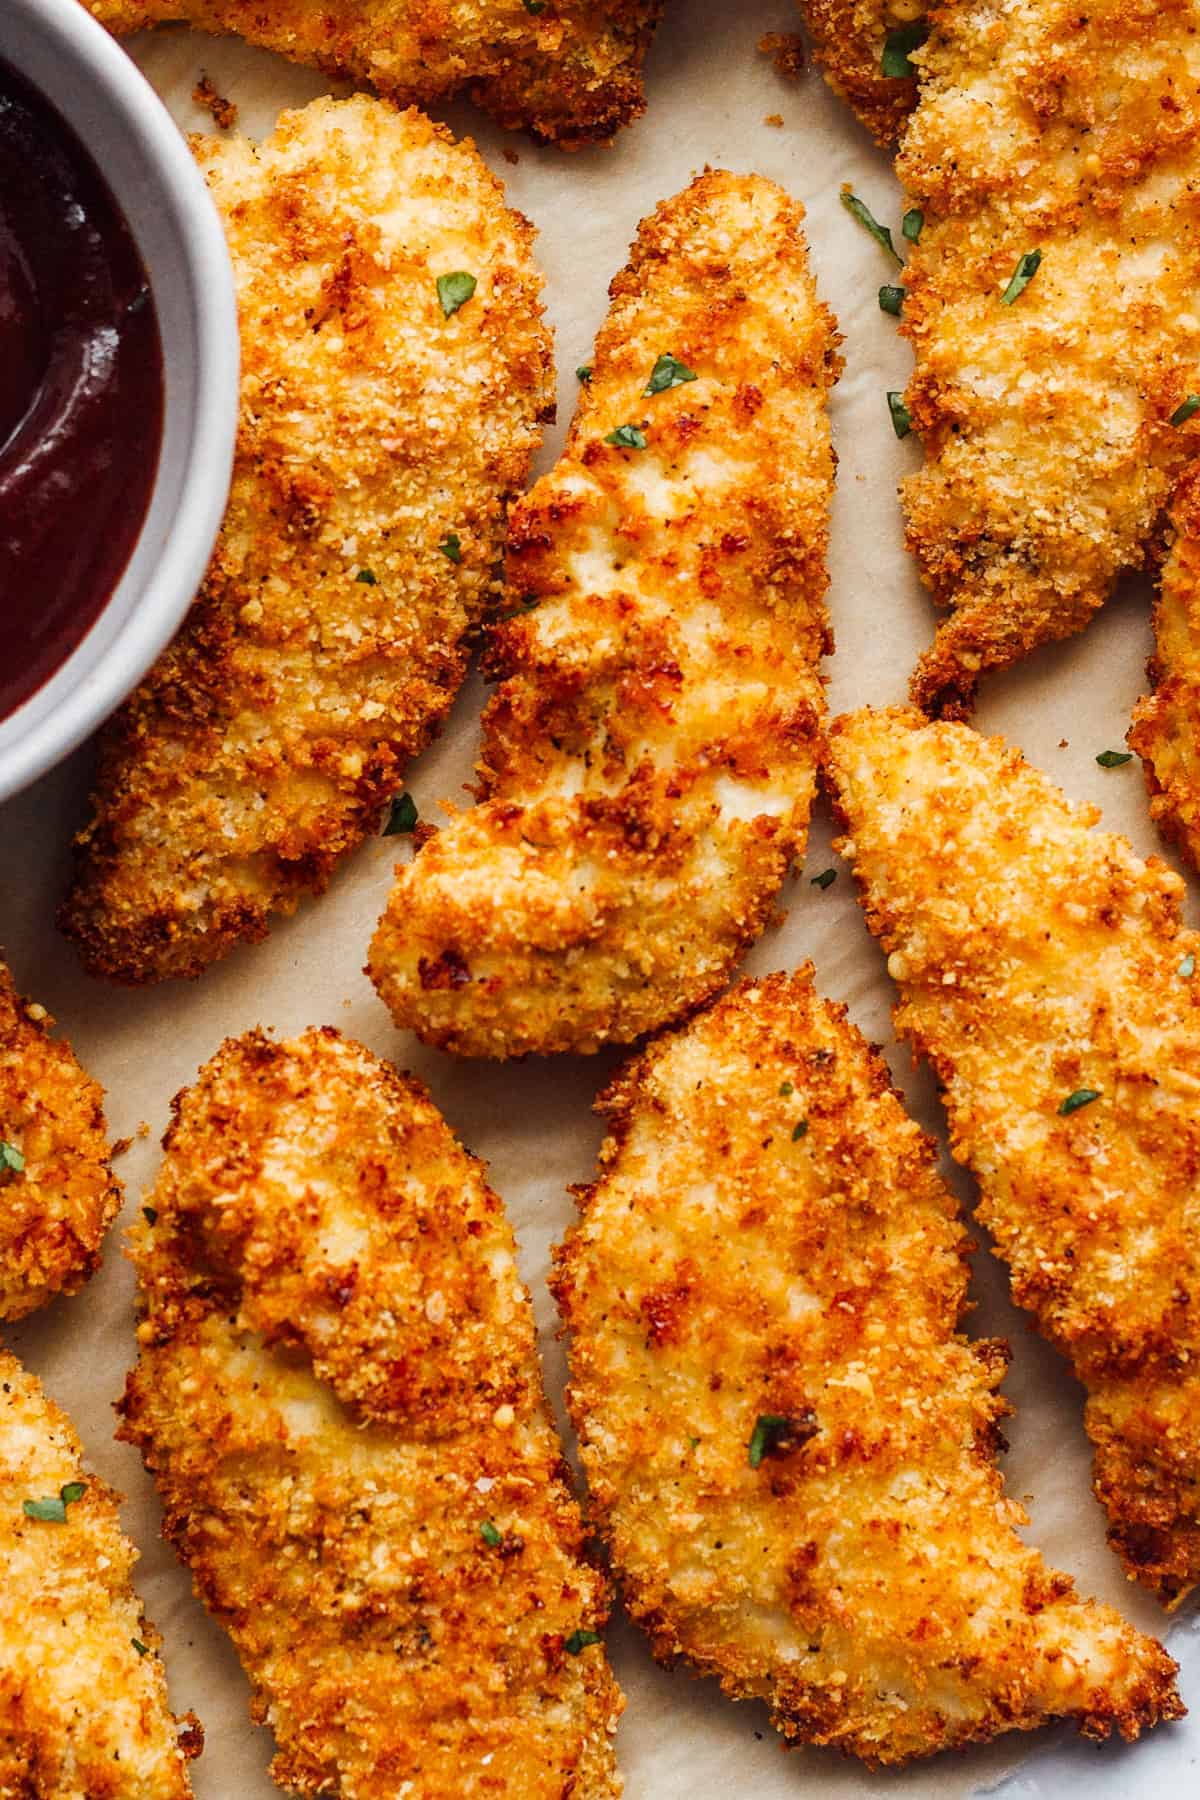 Top 15 Air Fryer Chicken Tenders Recipe – Easy Recipes To Make at Home